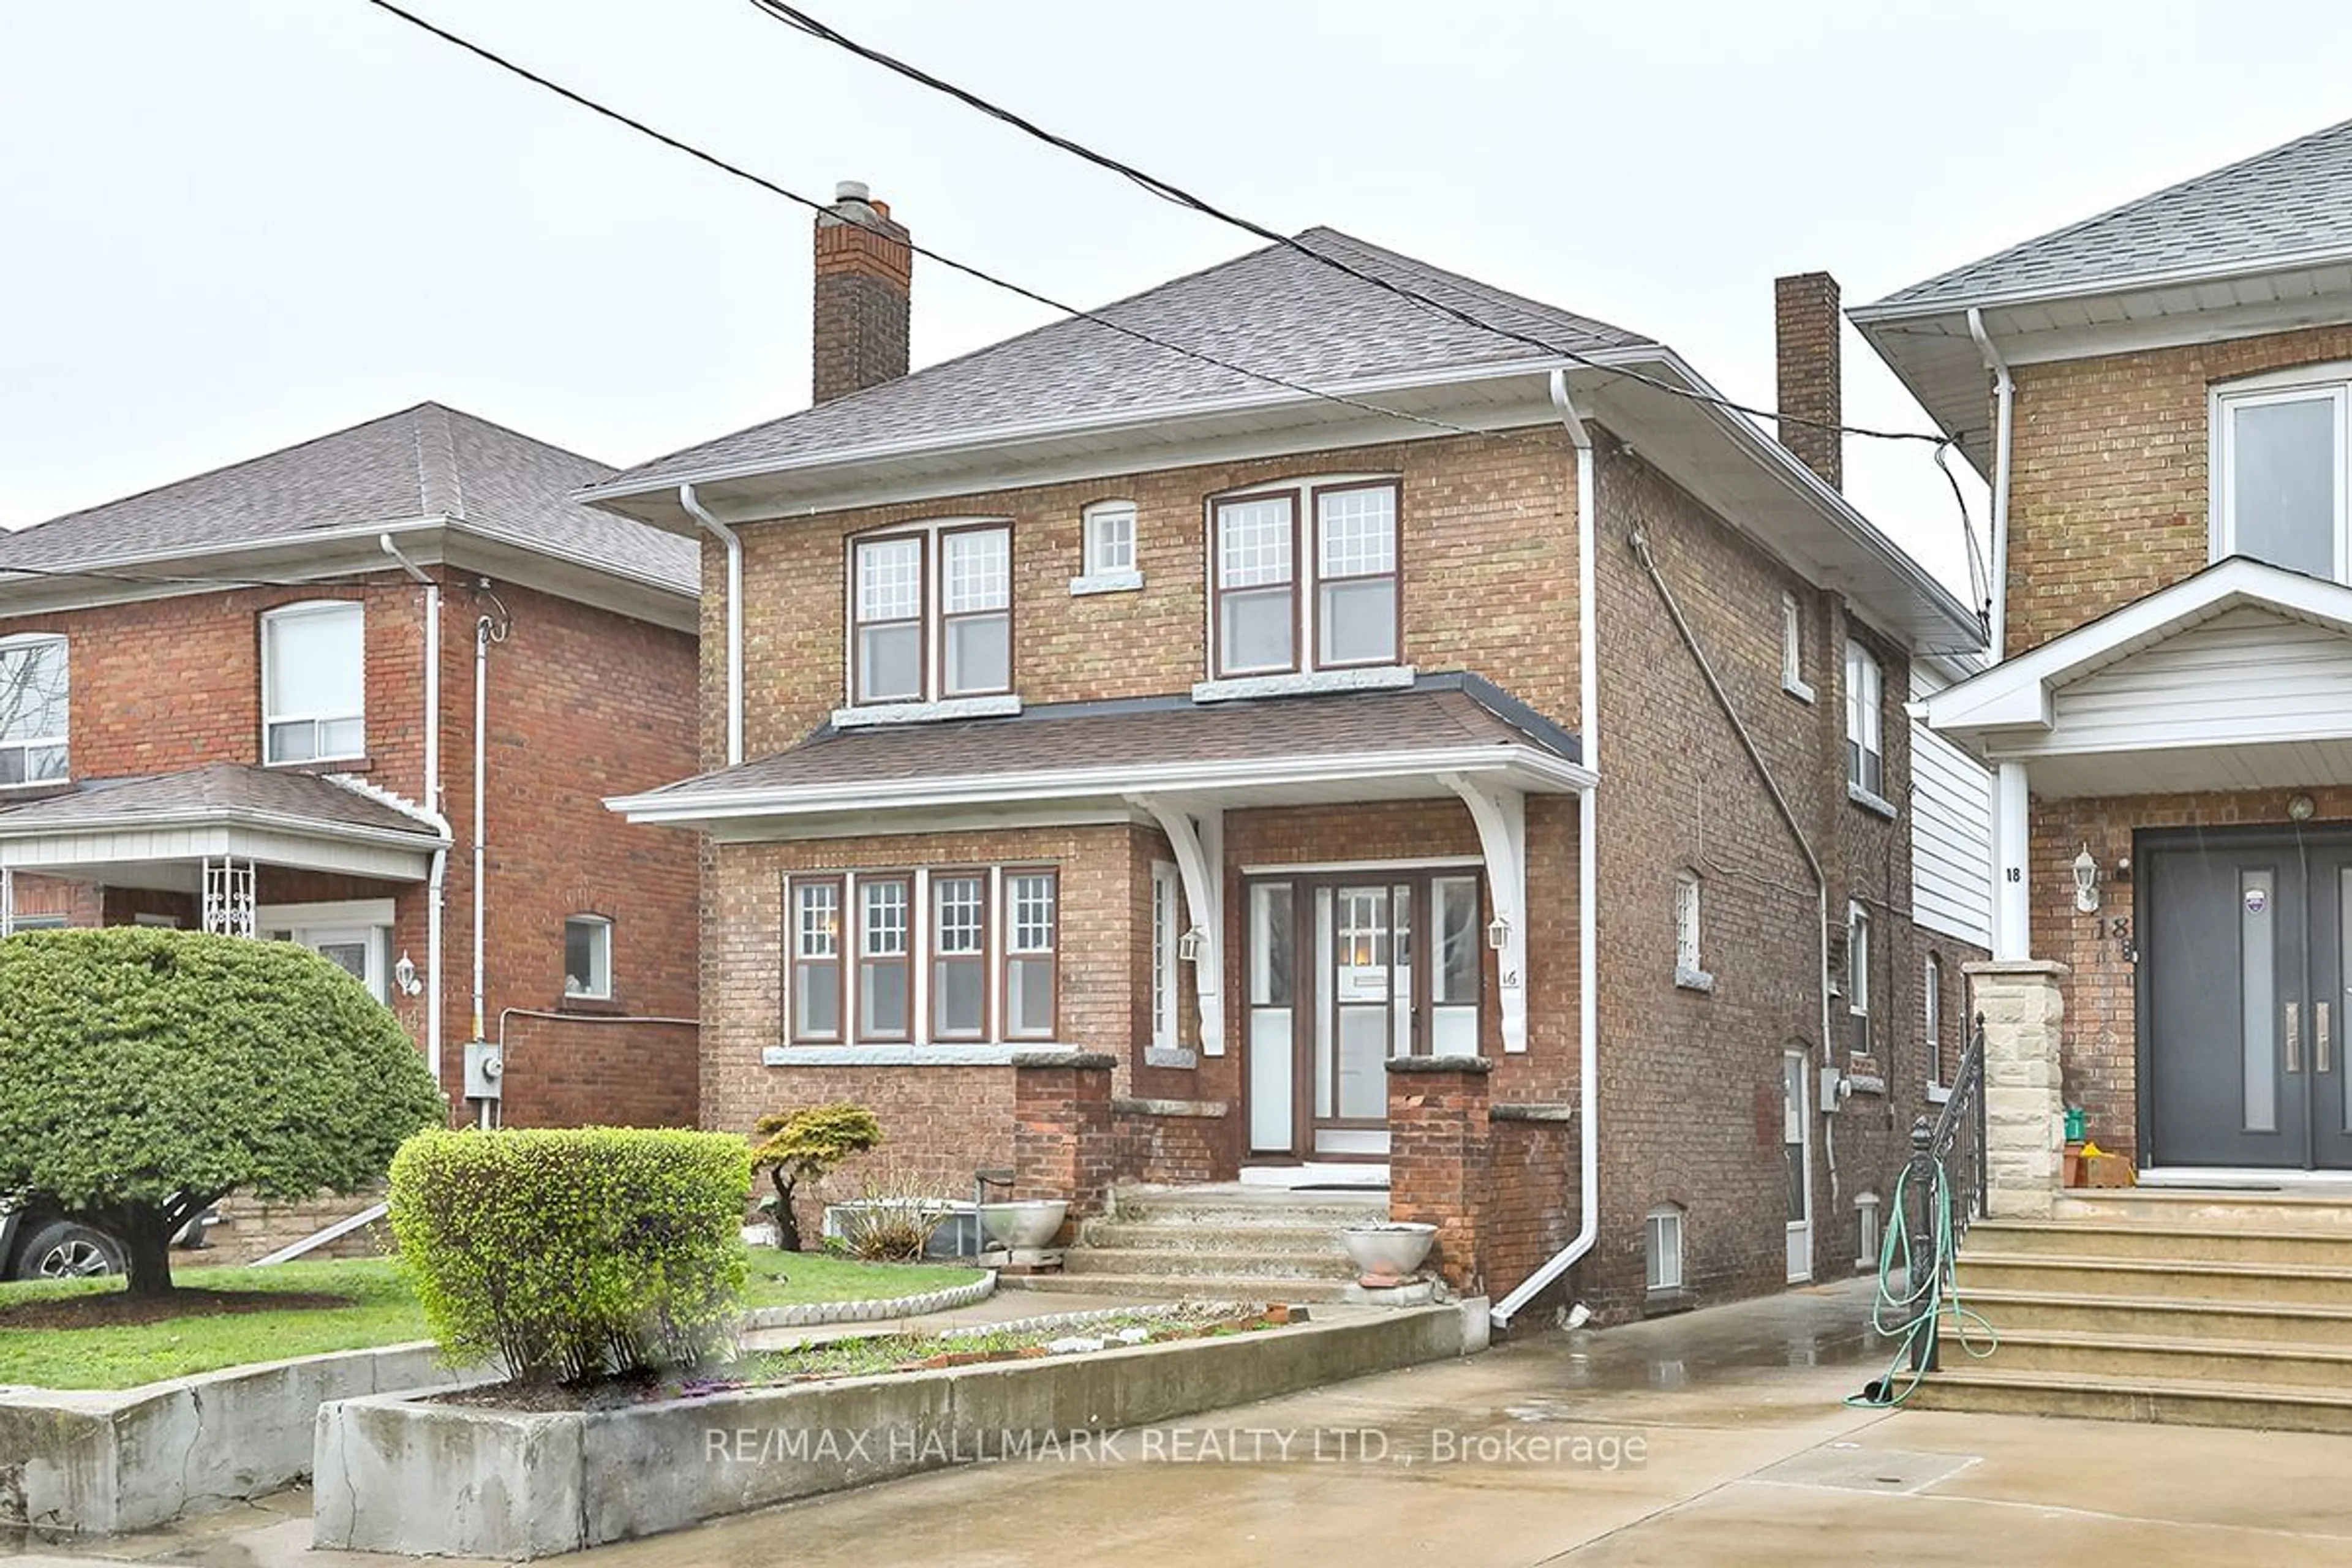 Home with brick exterior material for 16 Rusholme Rd, Toronto Ontario M6J 3H7